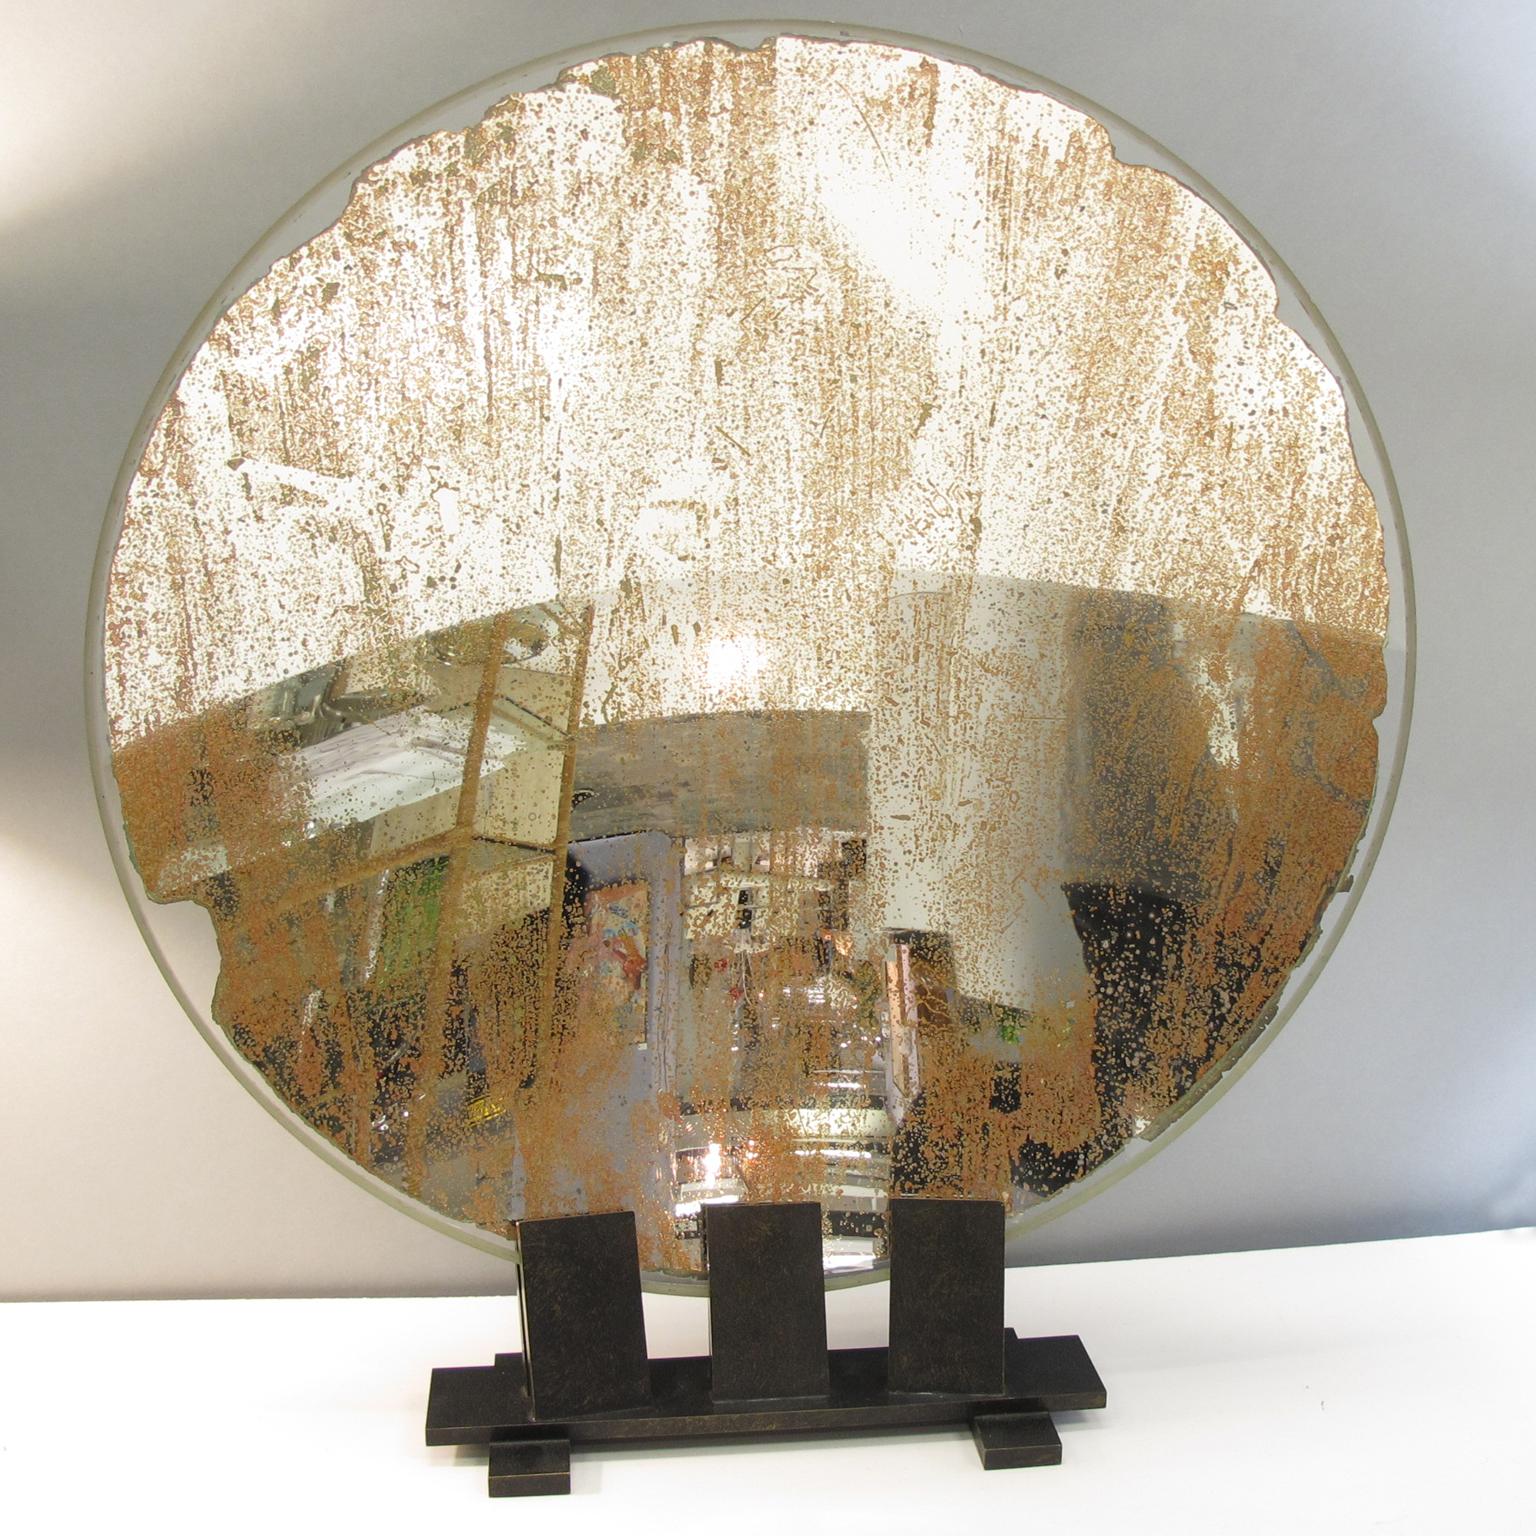 20th Century Industrial Lighthouse Mirror Optic Lens Sculpture